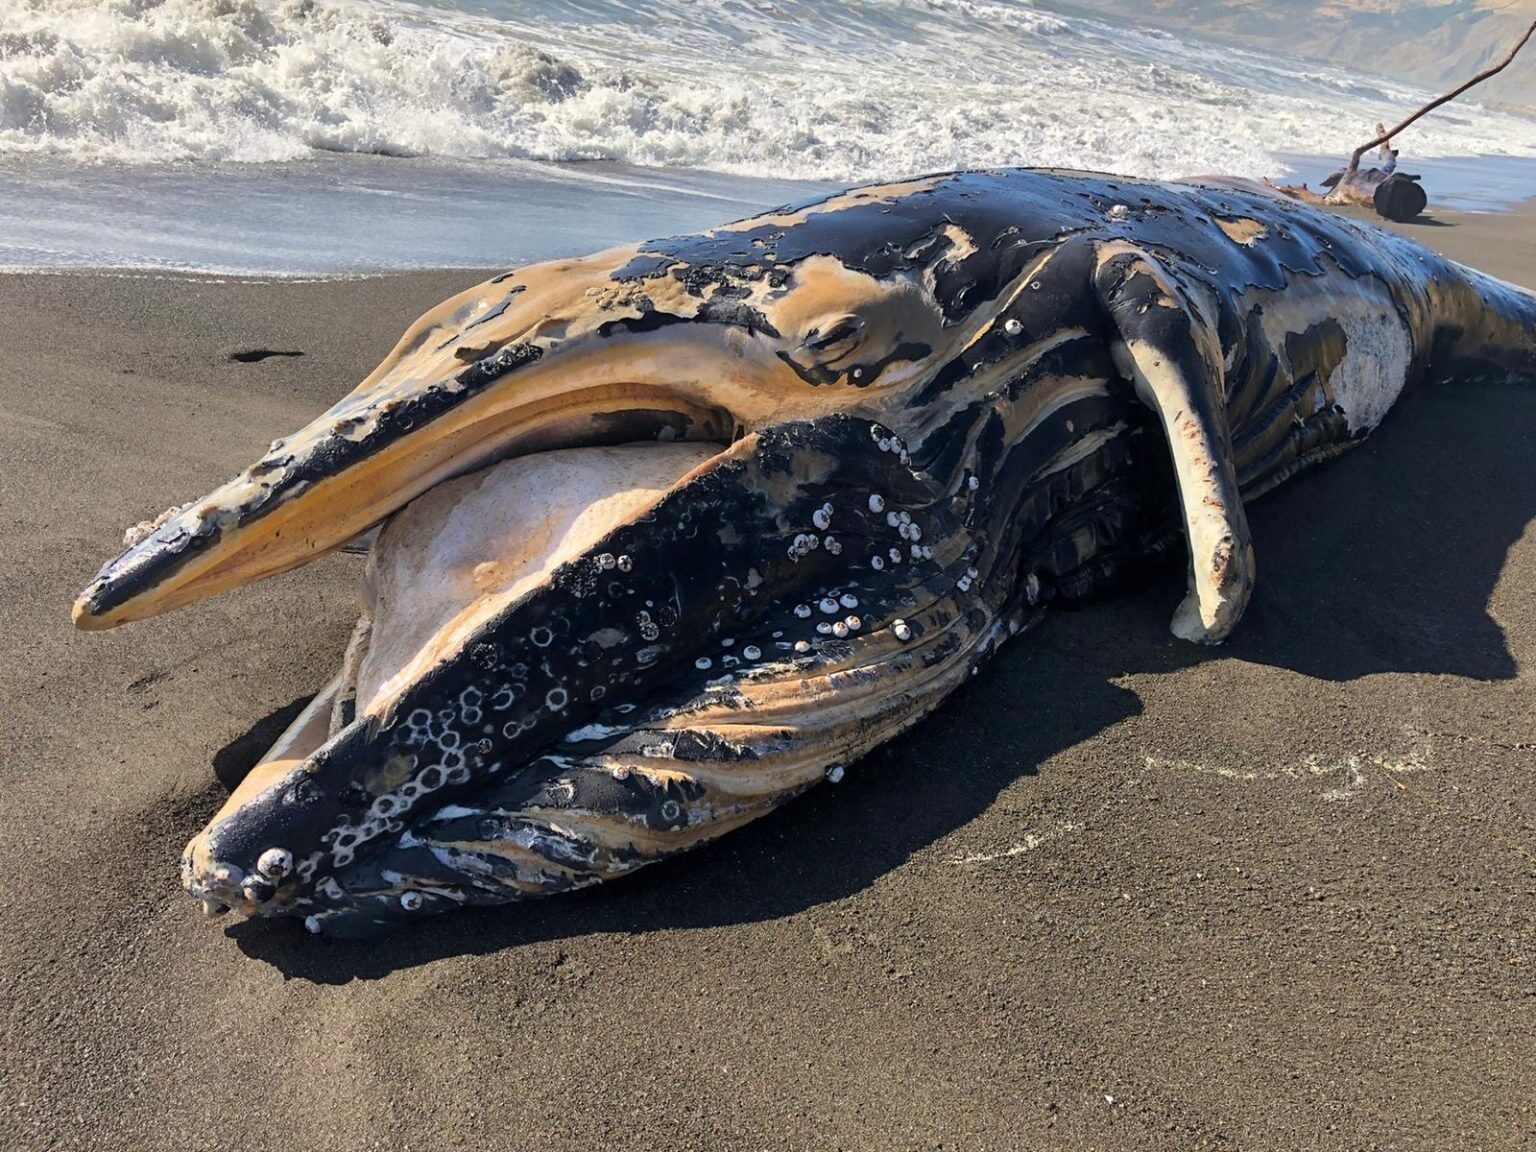 A humpback whale calf, mouth agape, lies dead on beach about a half mile north of the Mattole River mouth.